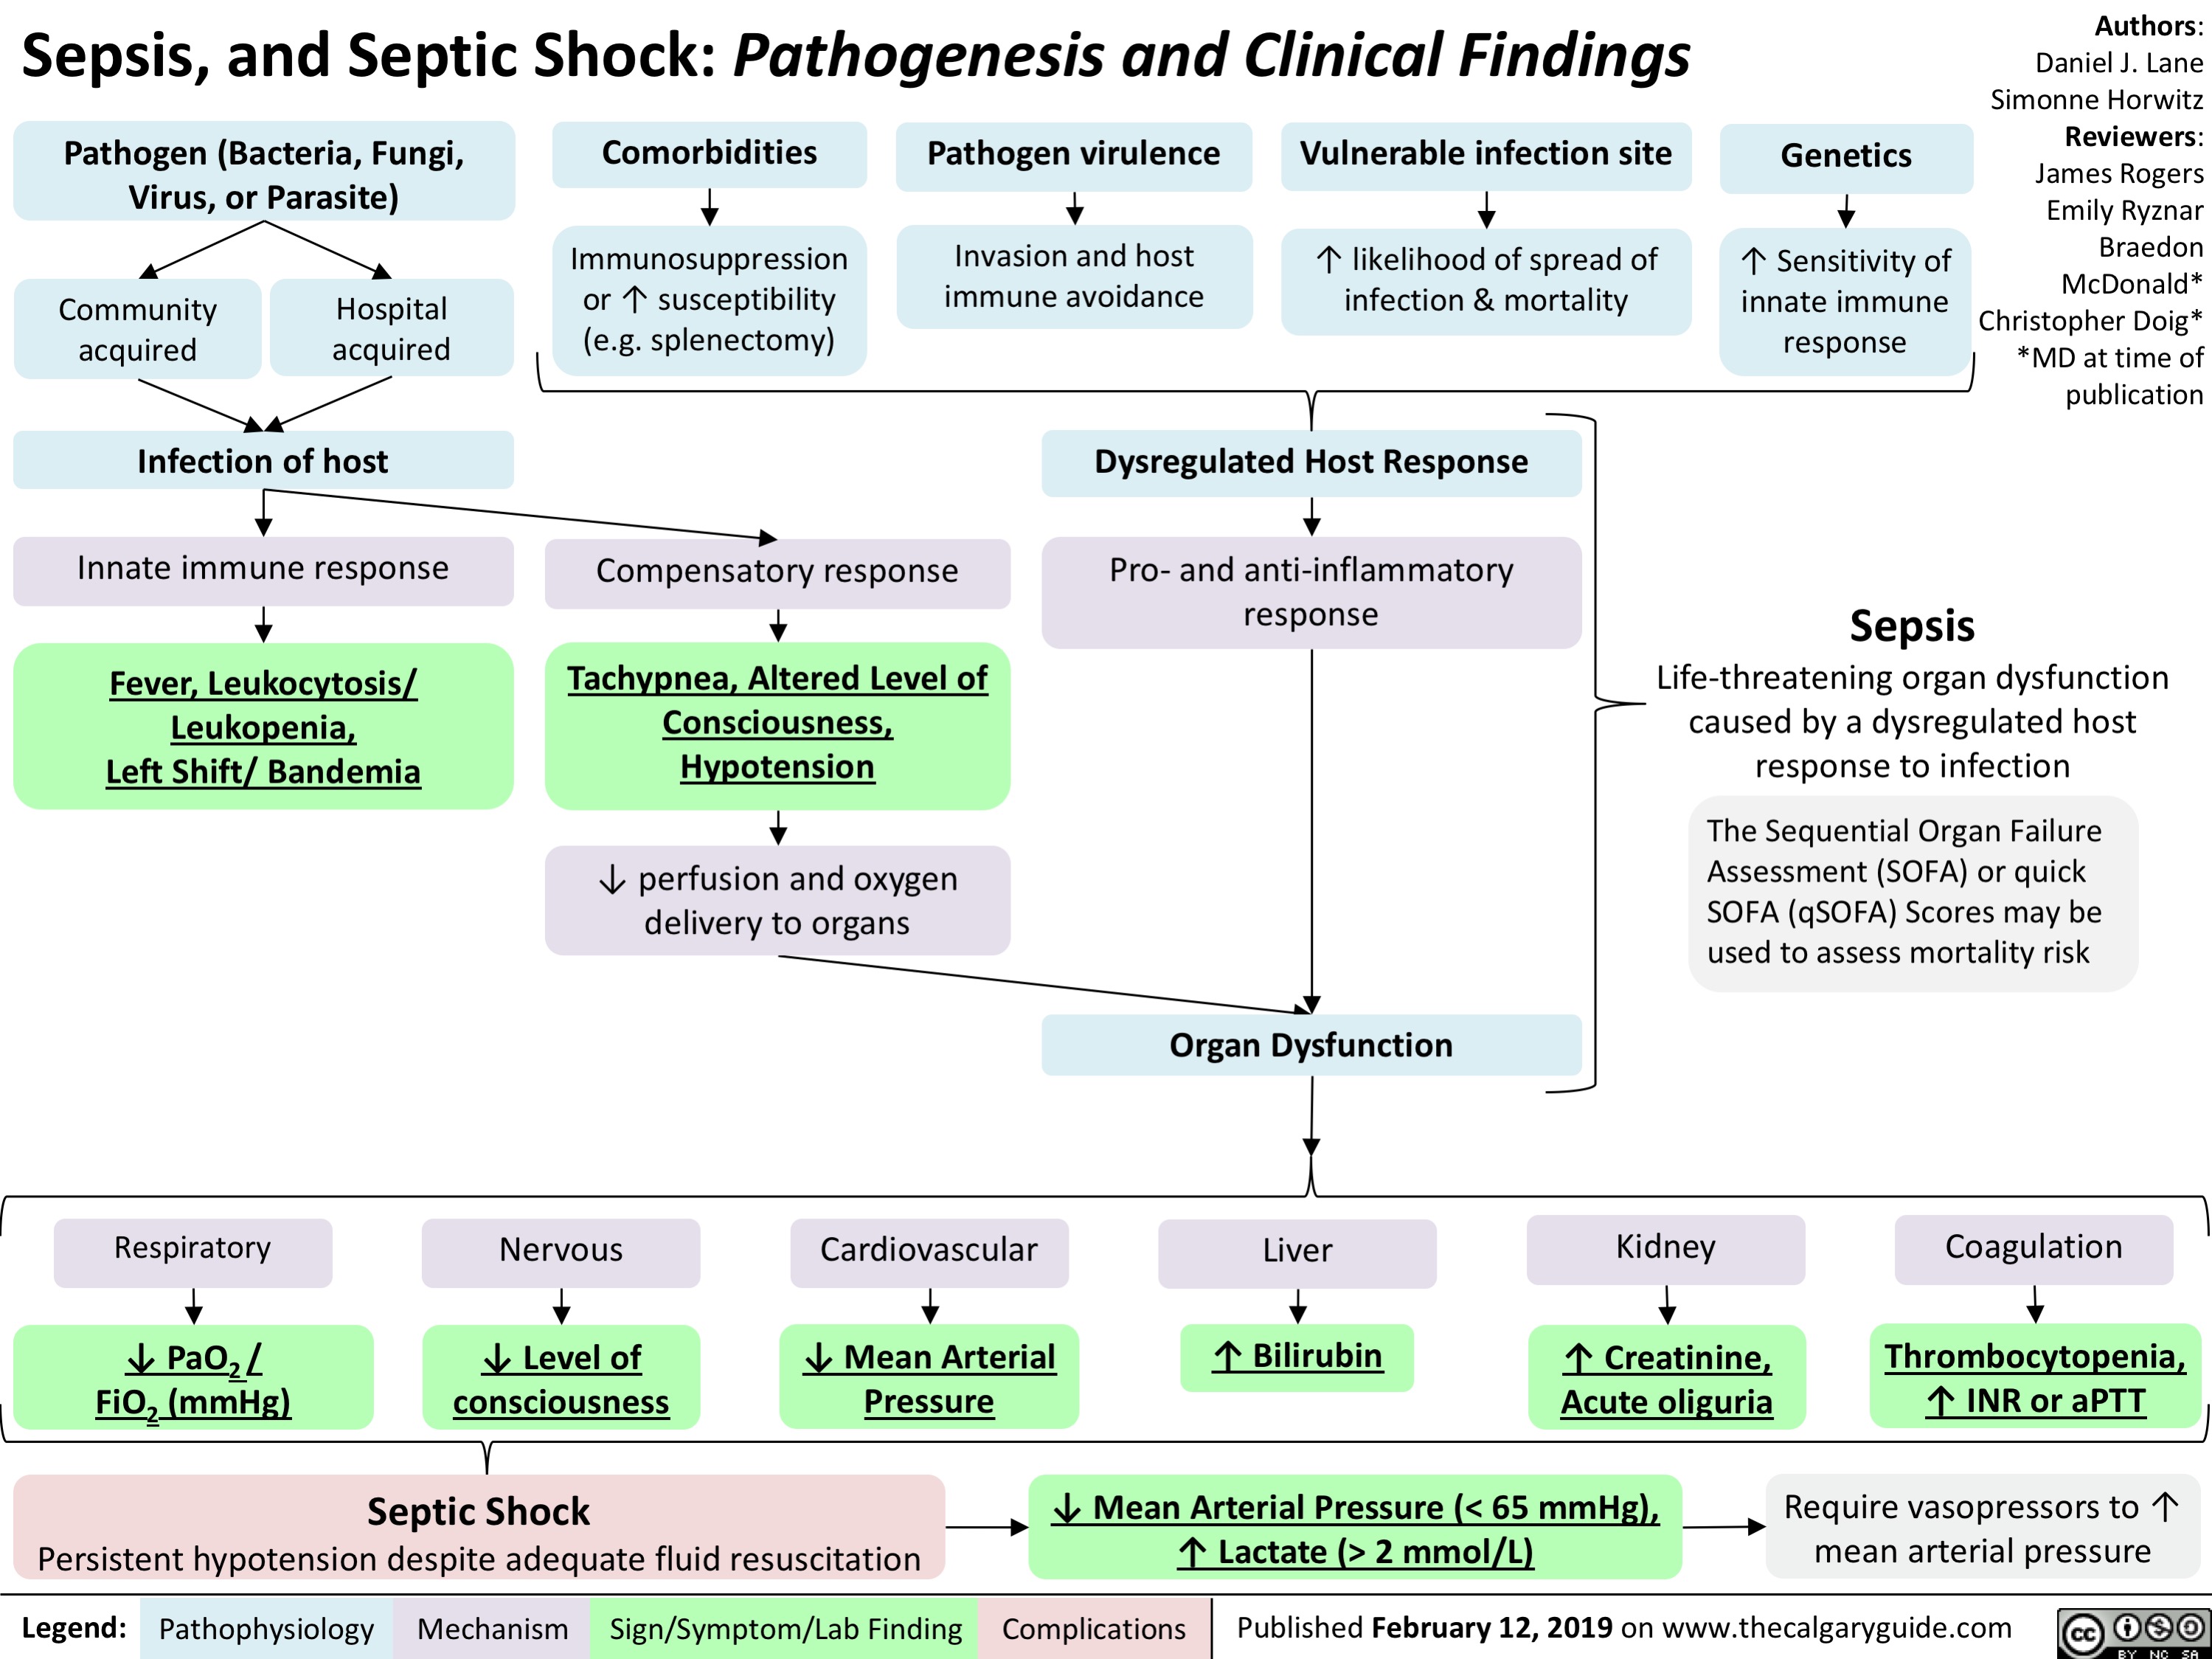 Sepsis, and Septic Shock: Pathogenesis and Clinical Findings
Authors: Daniel J. Lane Simonne Horwitz Reviewers: James Rogers Emily Ryznar Braedon McDonald* Christopher Doig* *MD at time of publication
Sepsis
     Pathogen (Bacteria, Fungi, Virus, or Parasite)
Comorbidities
Immunosuppression or ↑ susceptibility (e.g. splenectomy)
Pathogen virulence
Invasion and host immune avoidance
Vulnerable infection site
↑ likelihood of spread of infection & mortality
Genetics
↑ Sensitivity of innate immune response
            Community acquired
Hospital acquired
      Infection of host
Innate immune response
Fever, Leukocytosis/ Leukopenia, Left Shift/ Bandemia
Compensatory response
Tachypnea, Altered Level of Consciousness, Hypotension
↓ perfusion and oxygen delivery to organs
Dysregulated Host Response
Pro- and anti-inflammatory response
           Life-threatening organ dysfunction caused by a dysregulated host response to infection
The Sequential Organ Failure Assessment (SOFA) or quick
SOFA (qSOFA) Scores may be used to assess mortality risk
                 Respiratory
↓ PaO2 / FiO2 (mmHg)
Nervous
↓ Level of consciousness
Septic Shock
Cardiovascular
↓ Mean Arterial Pressure
Organ Dysfunction
Liver
↑ Bilirubin
Kidney
↑ Creatinine, Acute oliguria
Coagulation
Thrombocytopenia, ↑ INR or aPTT
Require vasopressors to ↑ mean arterial pressure
                          Persistent hypotension despite adequate fluid resuscitation
↓ Mean Arterial Pressure (< 65 mmHg), ↑ Lactate (> 2 mmol/L)
  Legend:
 Pathophysiology
 Mechanism
Sign/Symptom/Lab Finding
  Complications
Published February 12, 2019 on www.thecalgaryguide.com
   